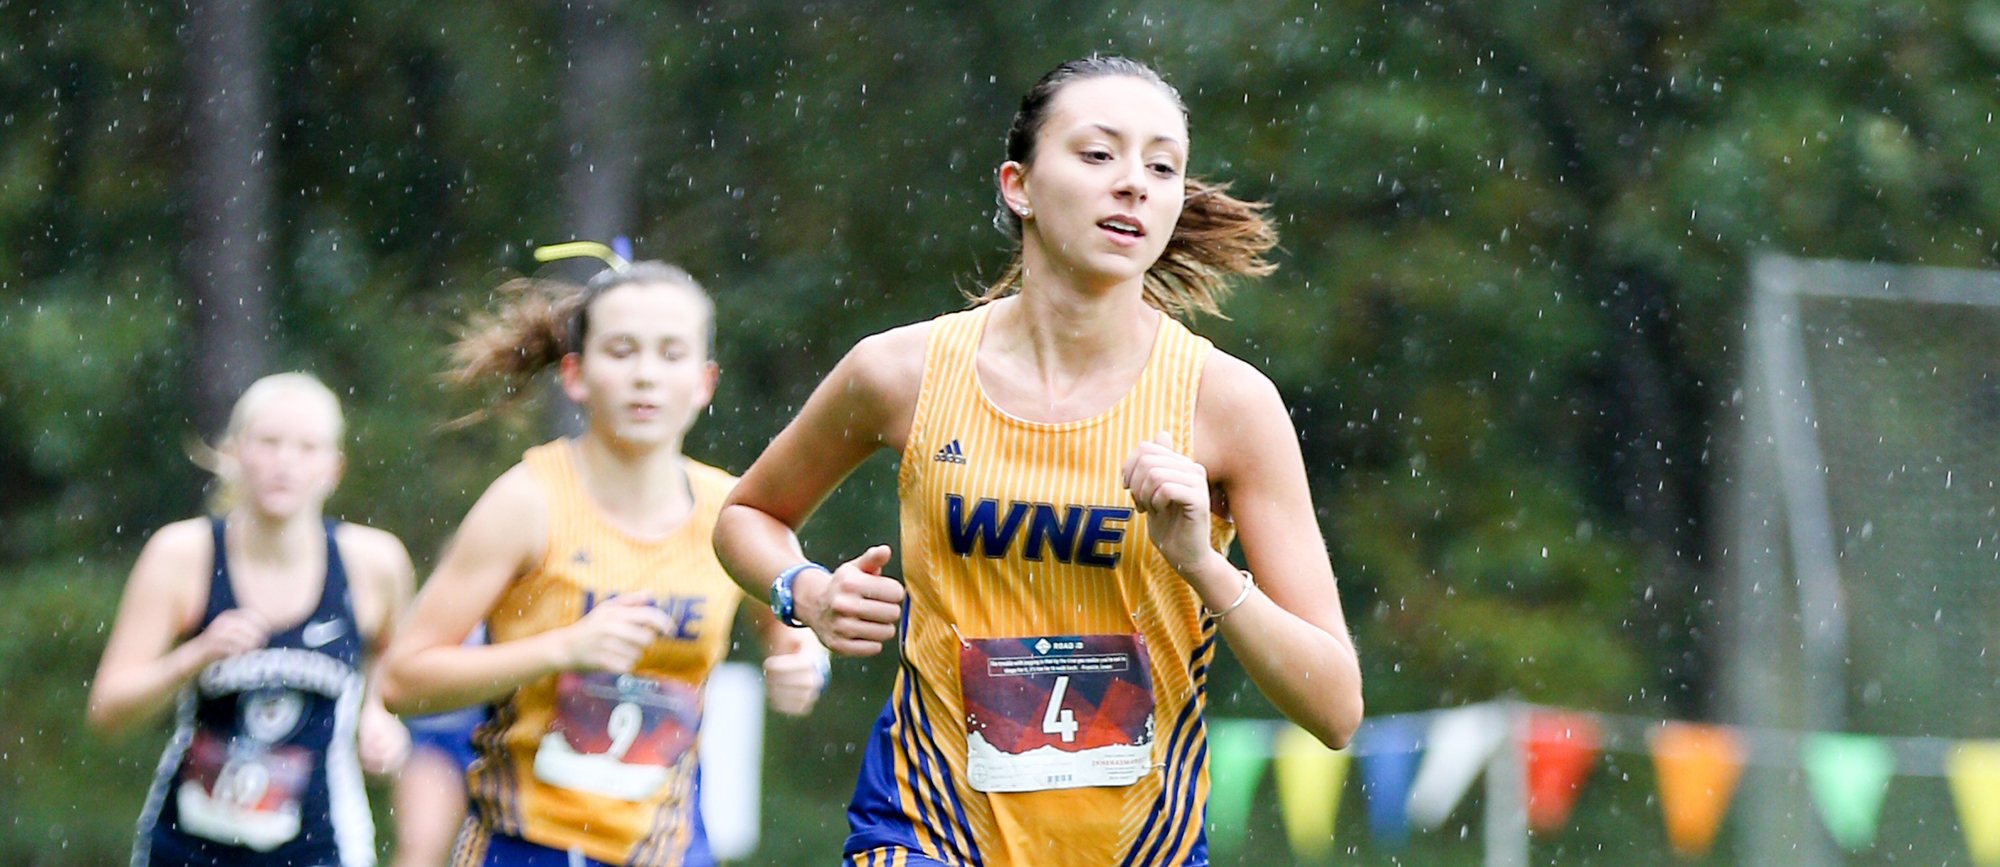 Senior Meagan Dias led the Golden Bears with a 169th place finish in her final collegiate race on Saturday at the New England Regional Championship. (Photo by Chris Marion)